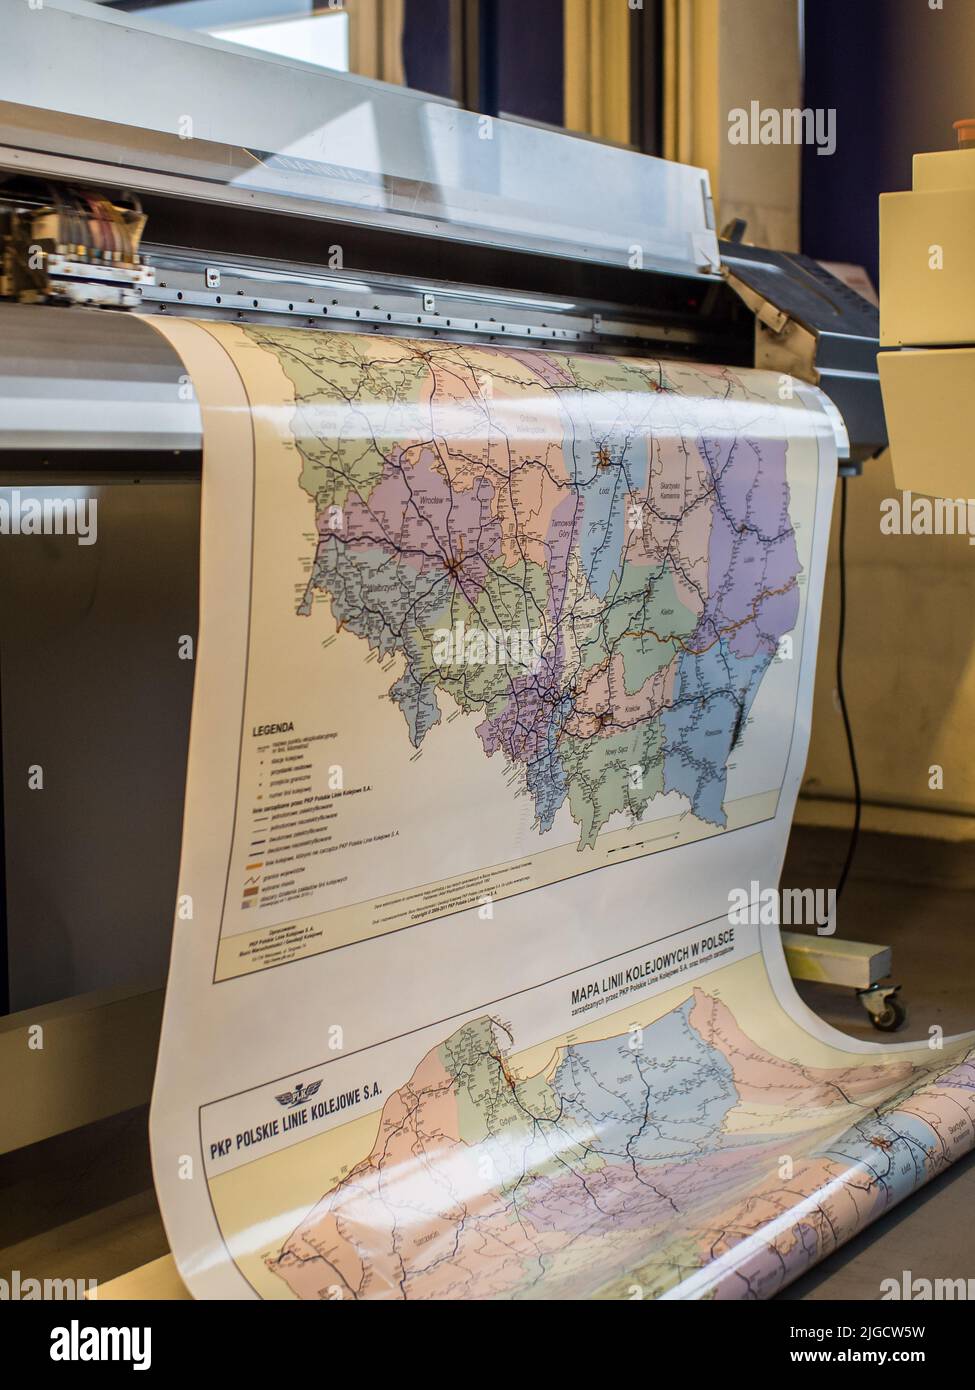 Printing the maps of railway connections in Poland, Eastern Europe Stock Photo